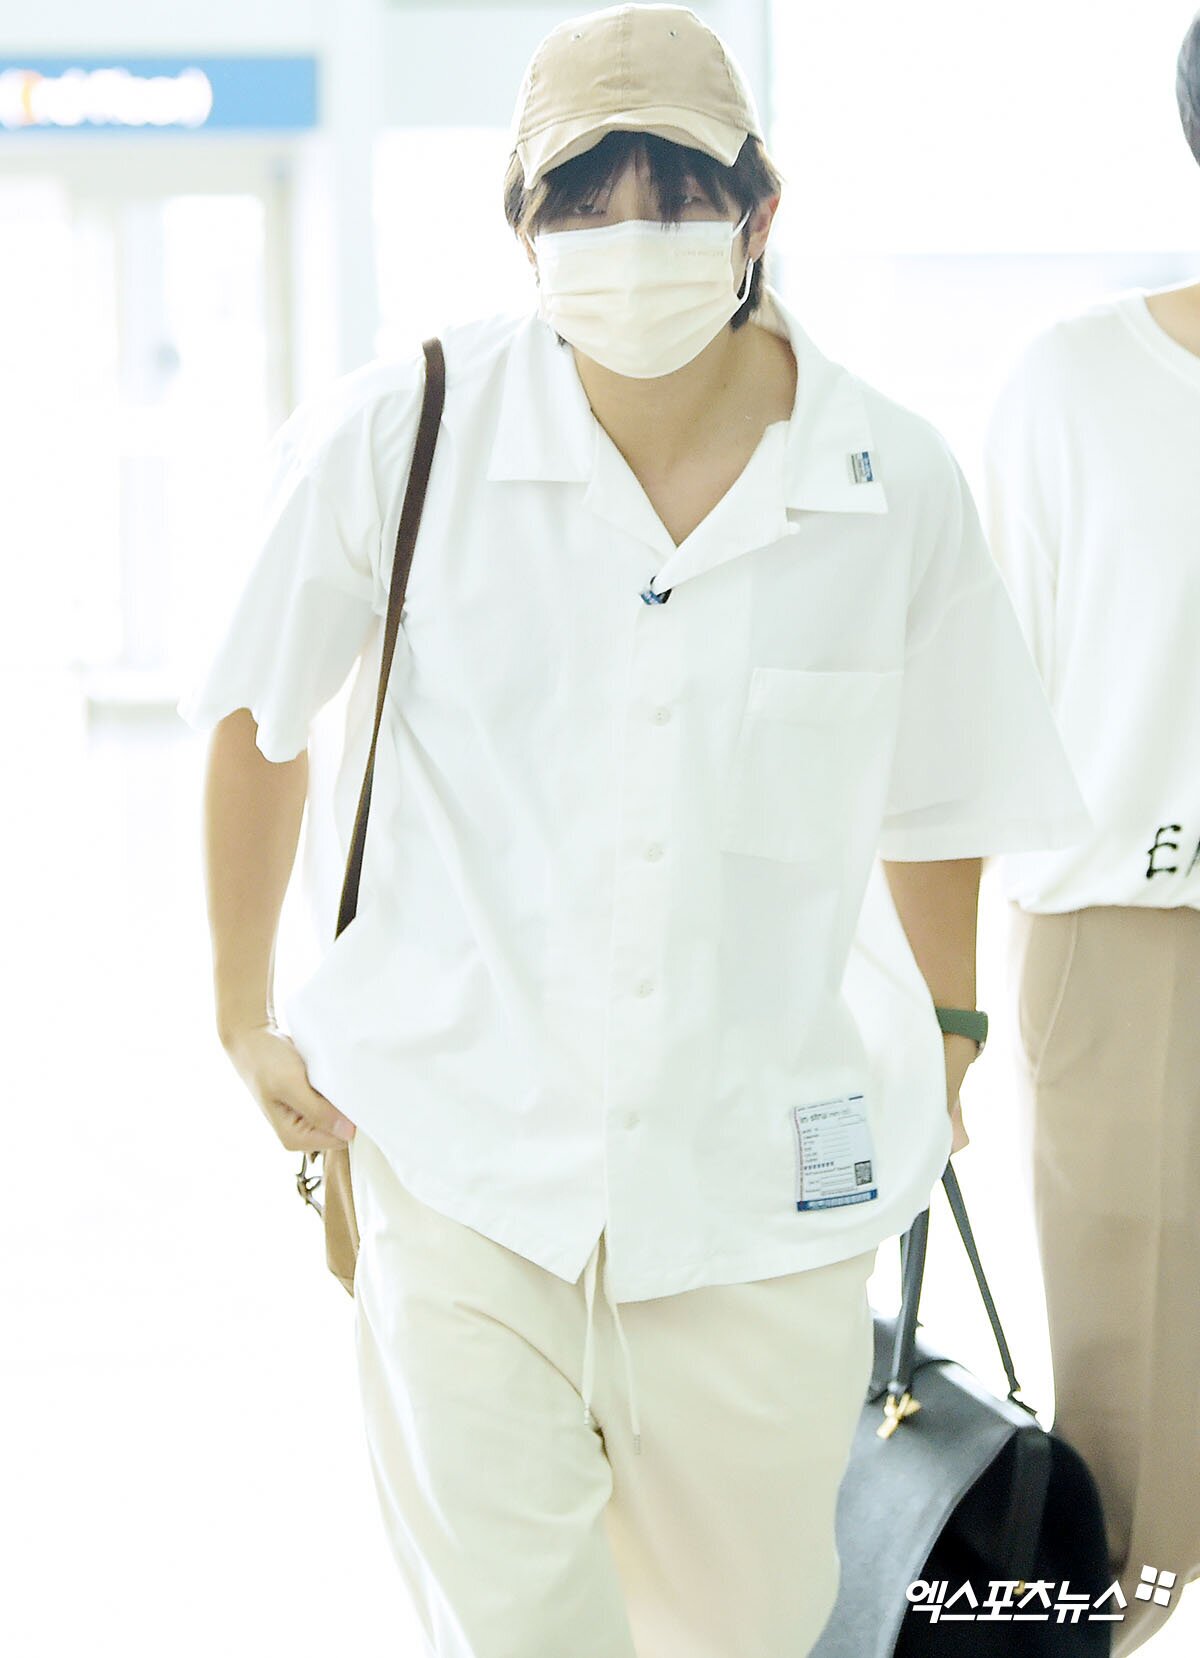 220529 BTS RM at Incheon International Airport Departing for the United  States to Attend the White House Invitation